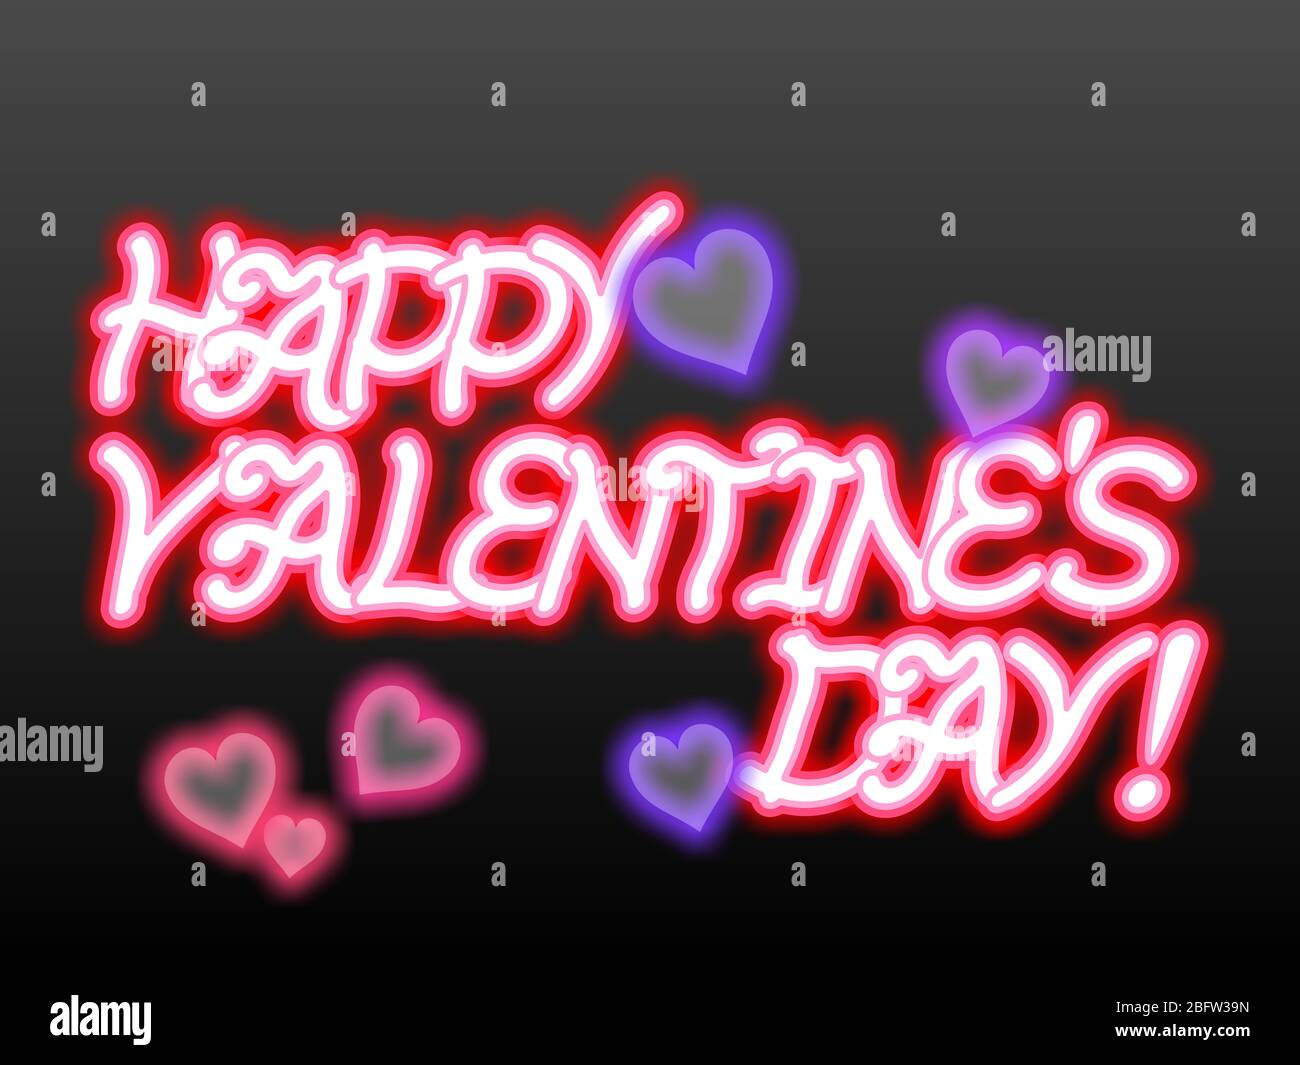 neon art of happy valentines day poster with decorative hearts and colorful glowing lights on a gradient black background. Stock Photo